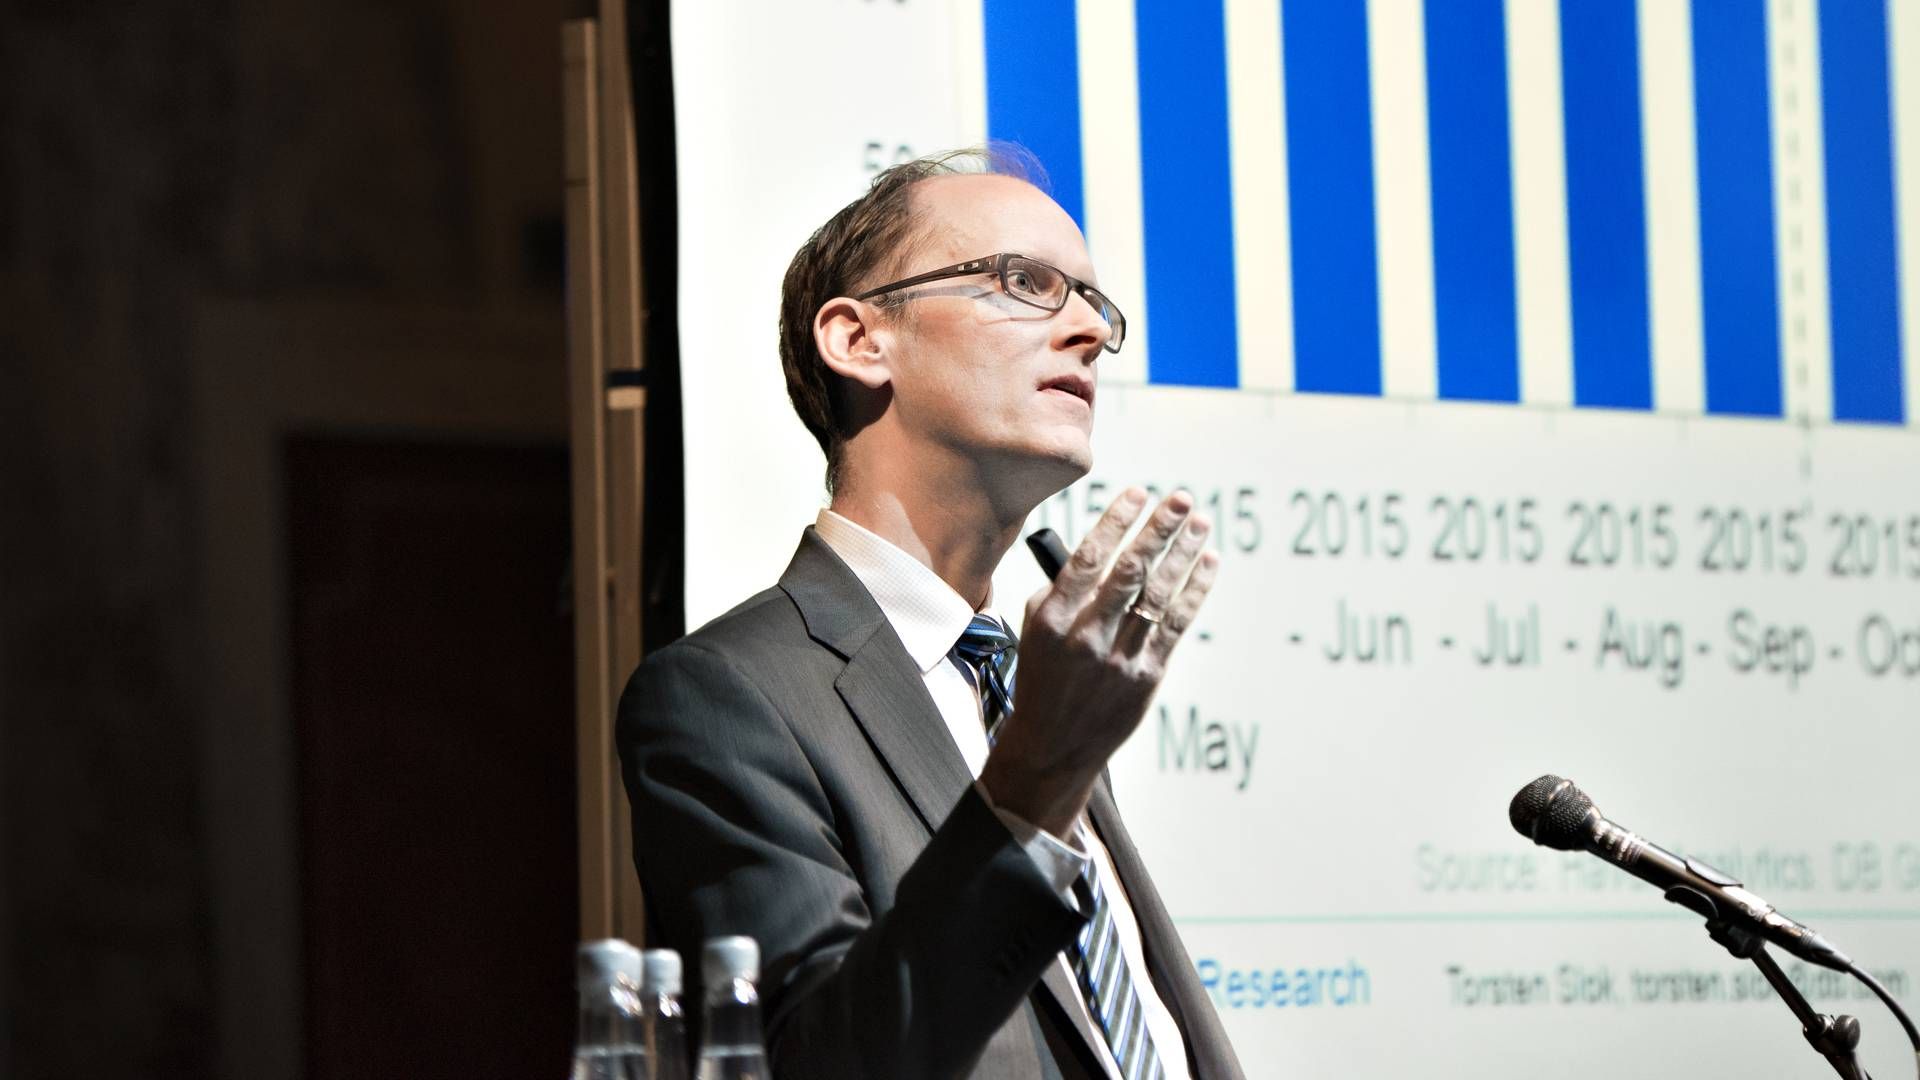 Torsten Slok speaking at a conference in Denmark in 2016 about the mortgage bonds. | Photo: Lars Krabbe